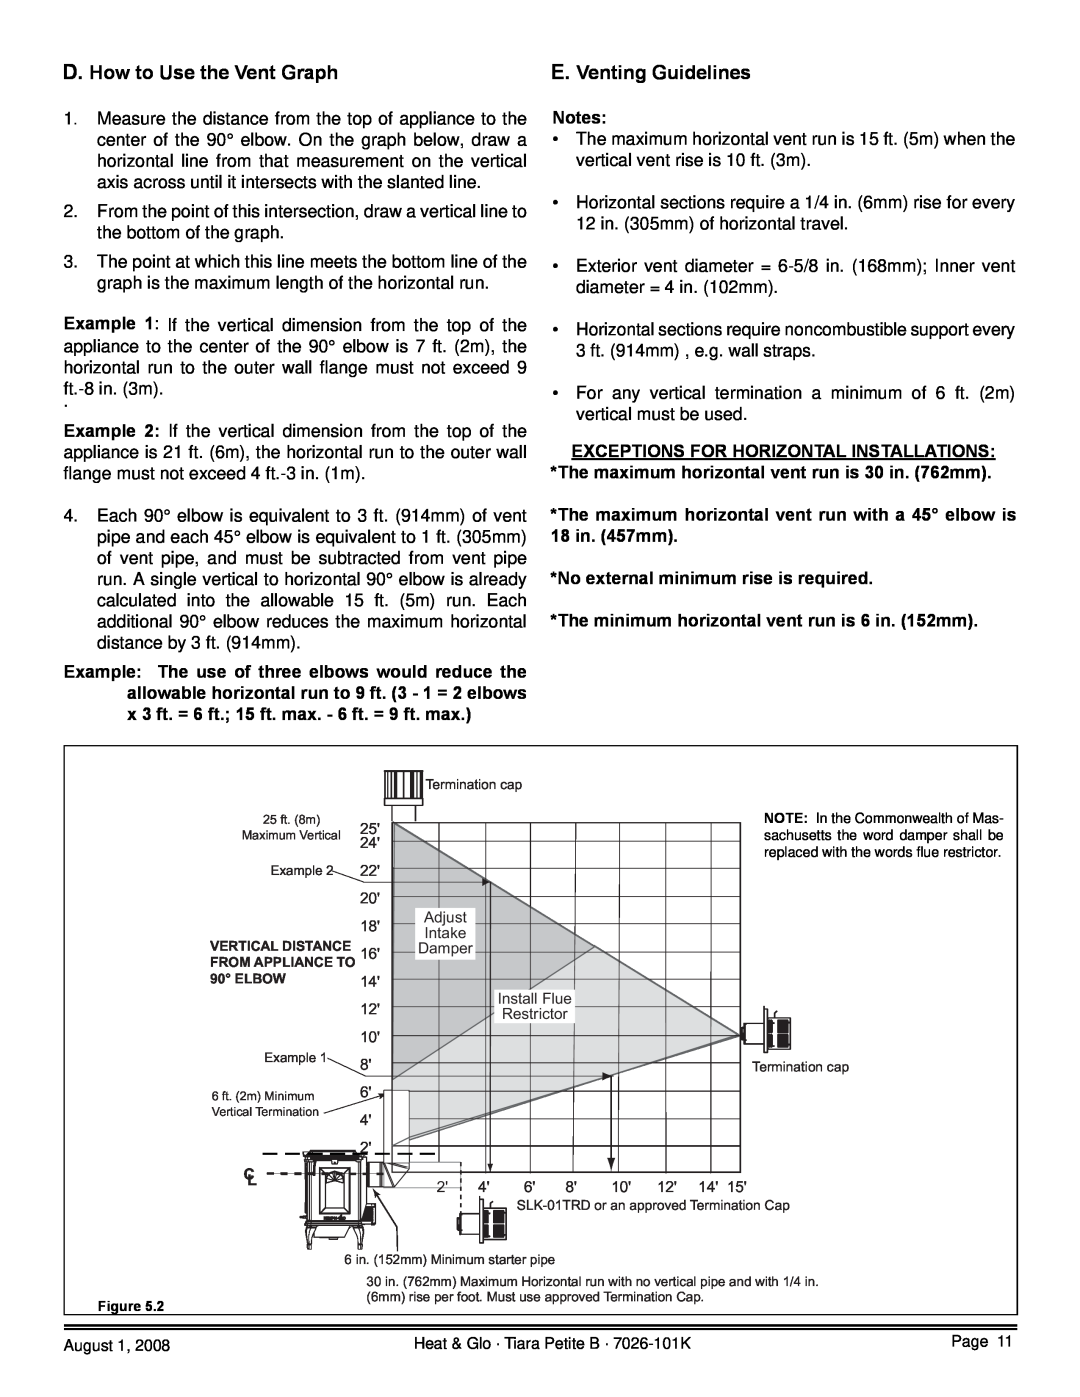 Heat & Glo LifeStyle TIARAP-BR D. How to Use the Vent Graph, E. Venting Guidelines, No external minimum rise is required 